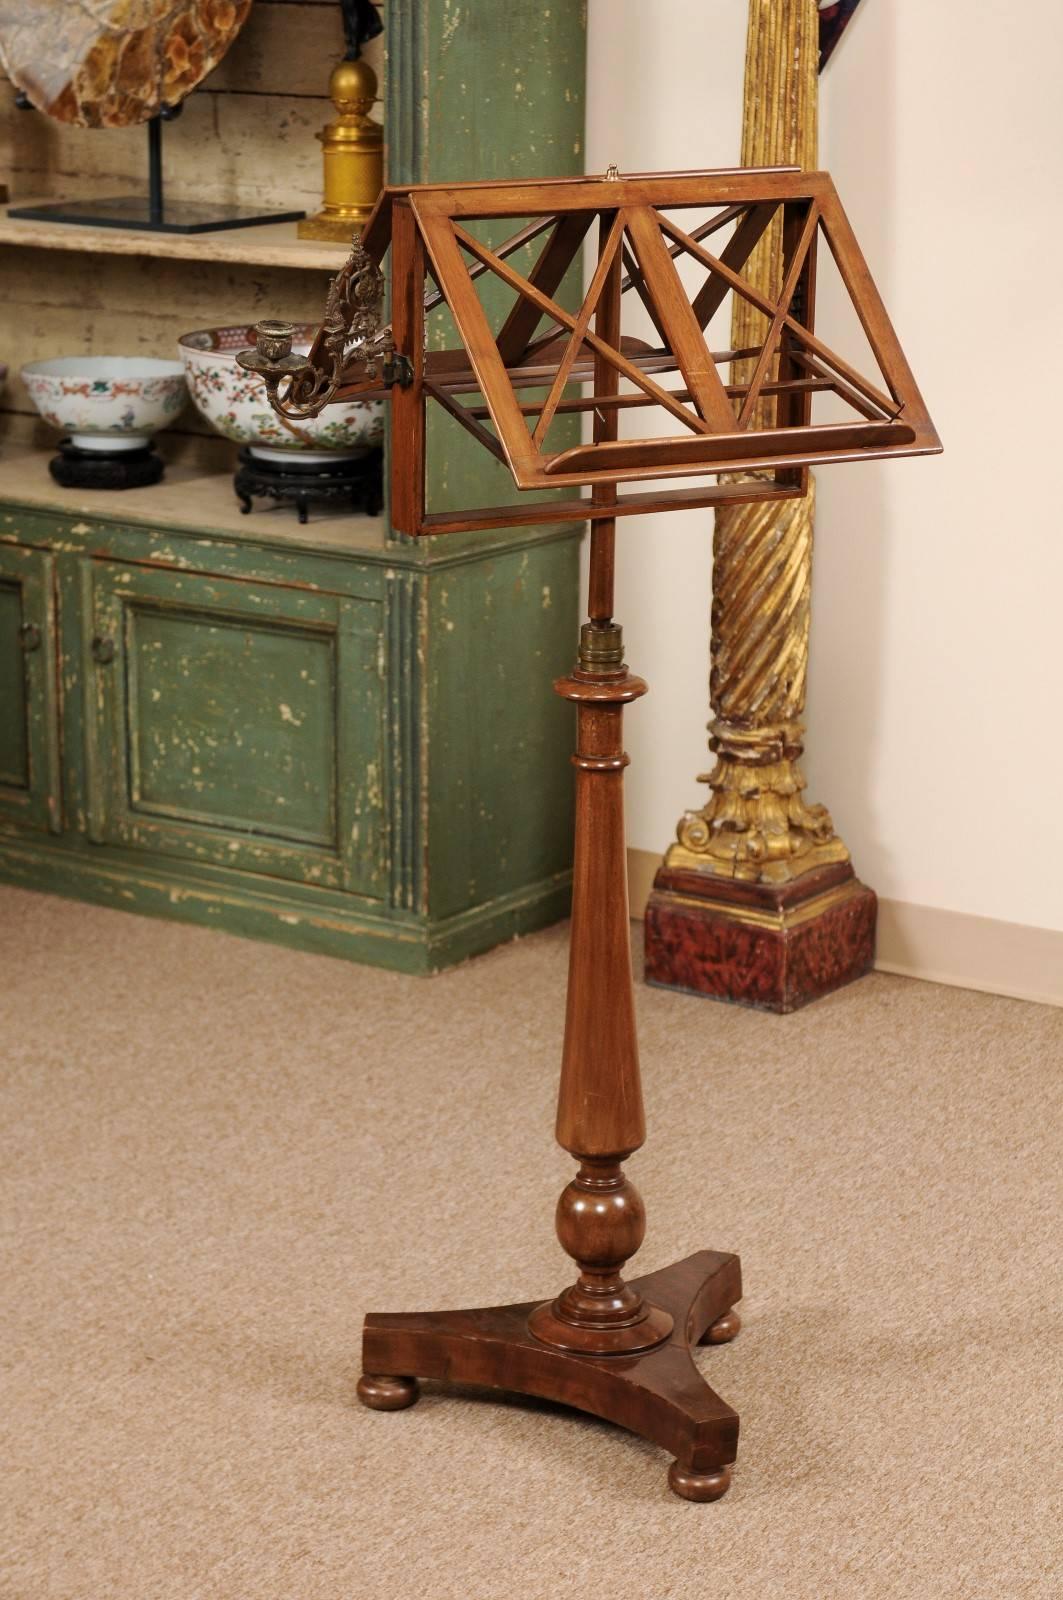 19th century French mahogany music stand with candle sconce, turned pedestal base, and bun feet. Dual sided for use in duets.